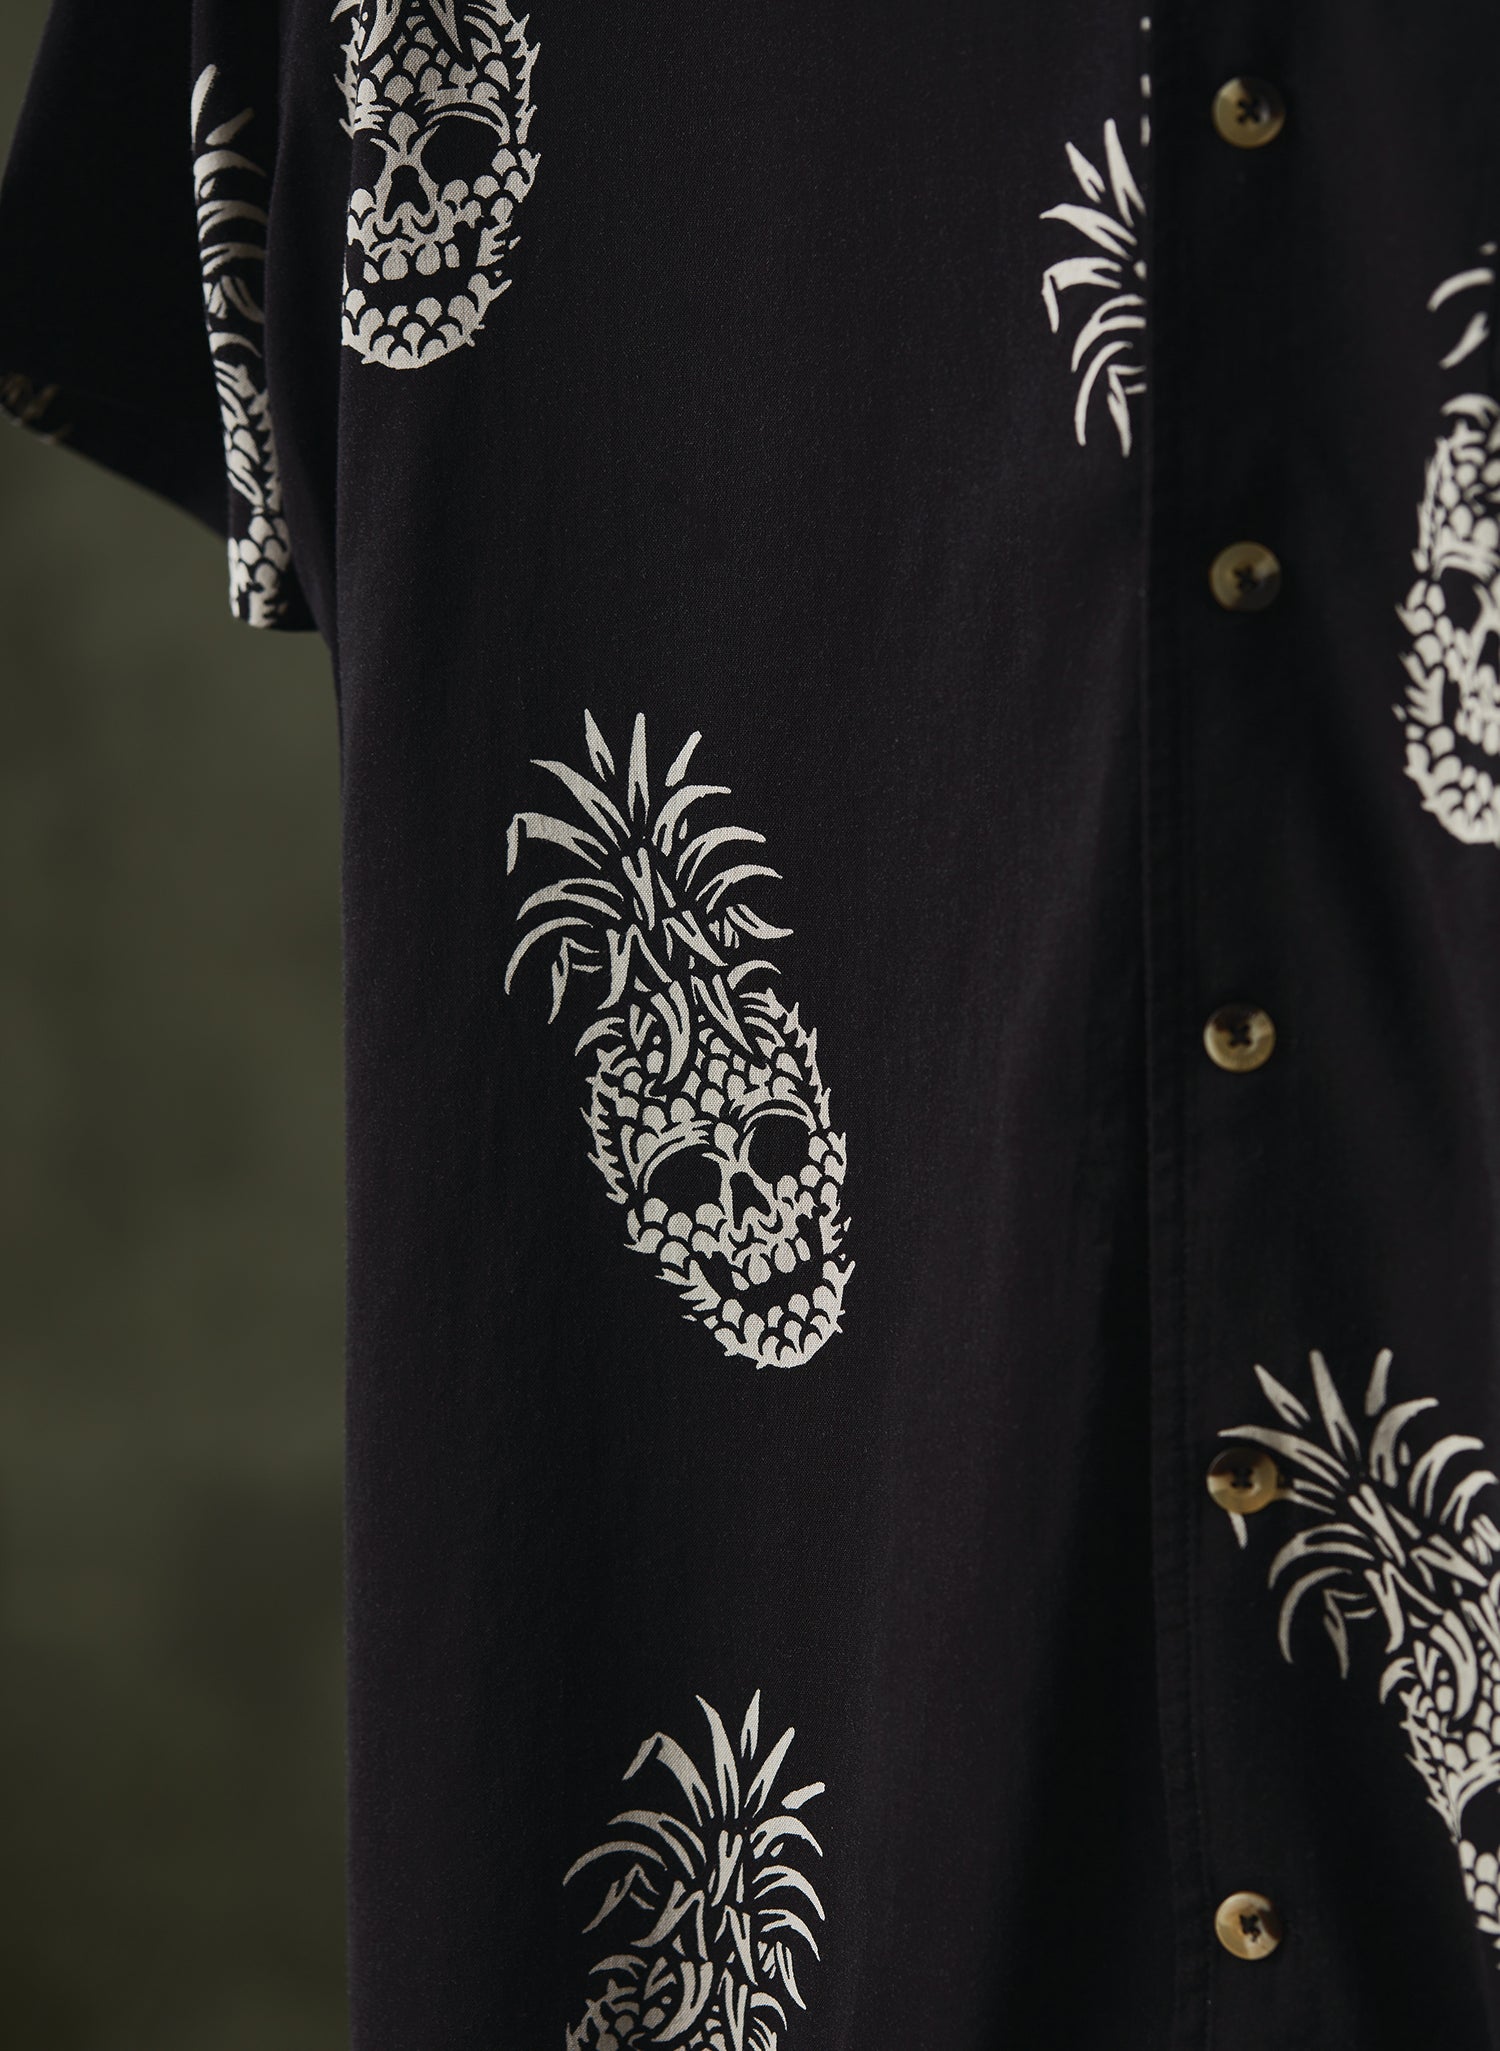 Pyknic | Permanent Vacation Casual Button-Up Shirt | Button Down Shirt with All Over Graphic Print, Tropical Pineapple Skull Tiki Shirt, Cool Food Shirt, Best Foodie Shirt, Best Foodie Gift, Food Themed Apparel, Food Tattoo Flash, Pineapple Pattern Button Down Shirt, Cool Button Up Shirts, Alternative Lifestyle Brand, Motorcycle Lifestyle Brand, Skull Button Up Shirt, 